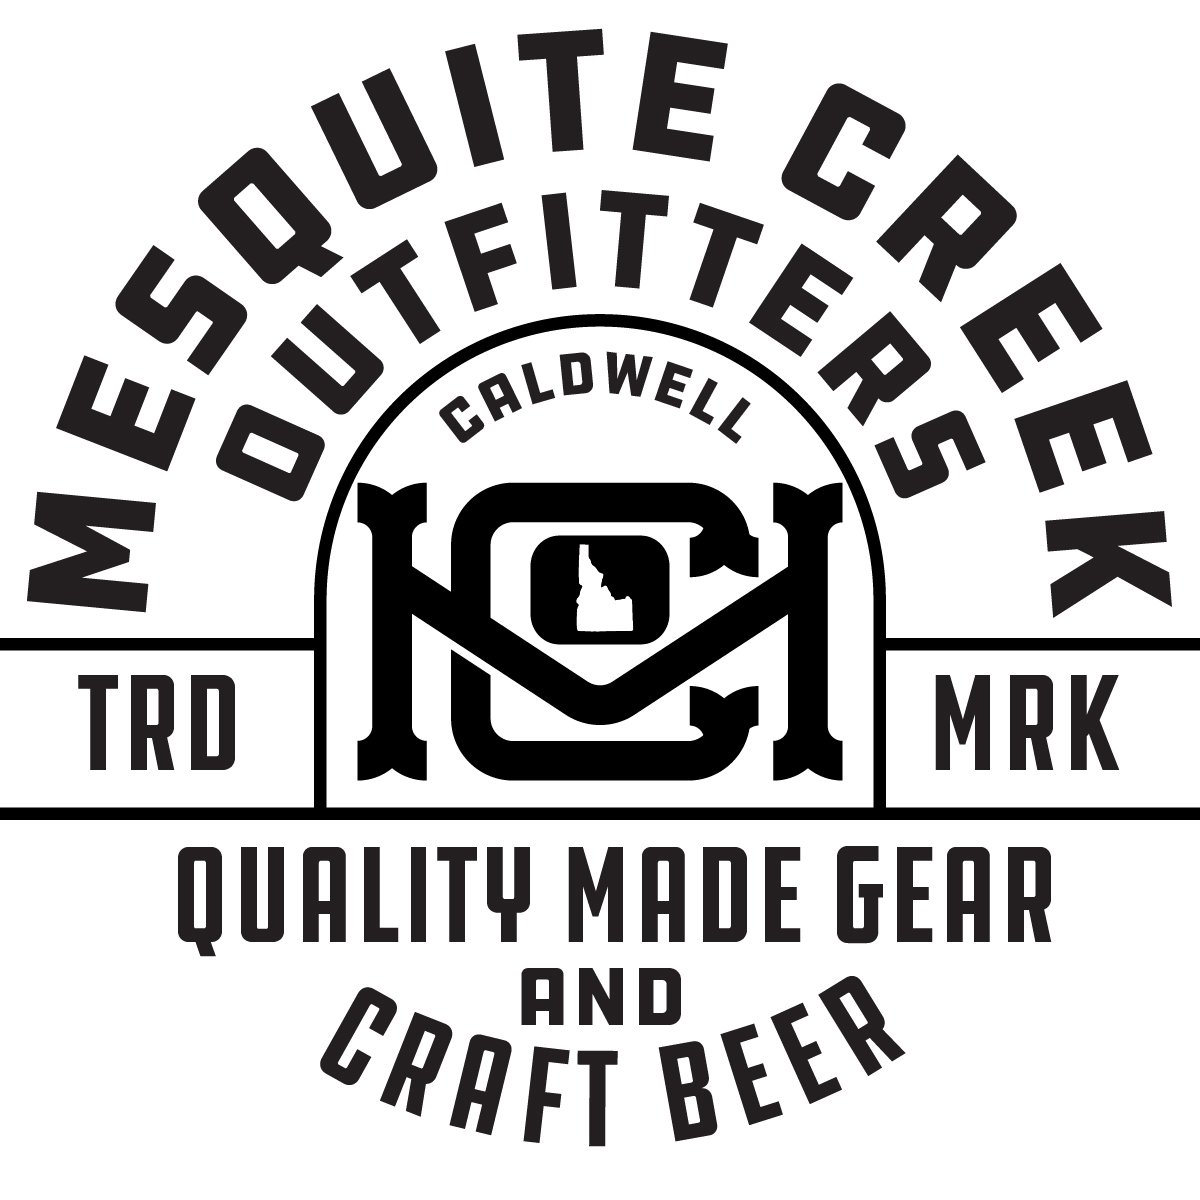 Mesquite Creek Outfitters